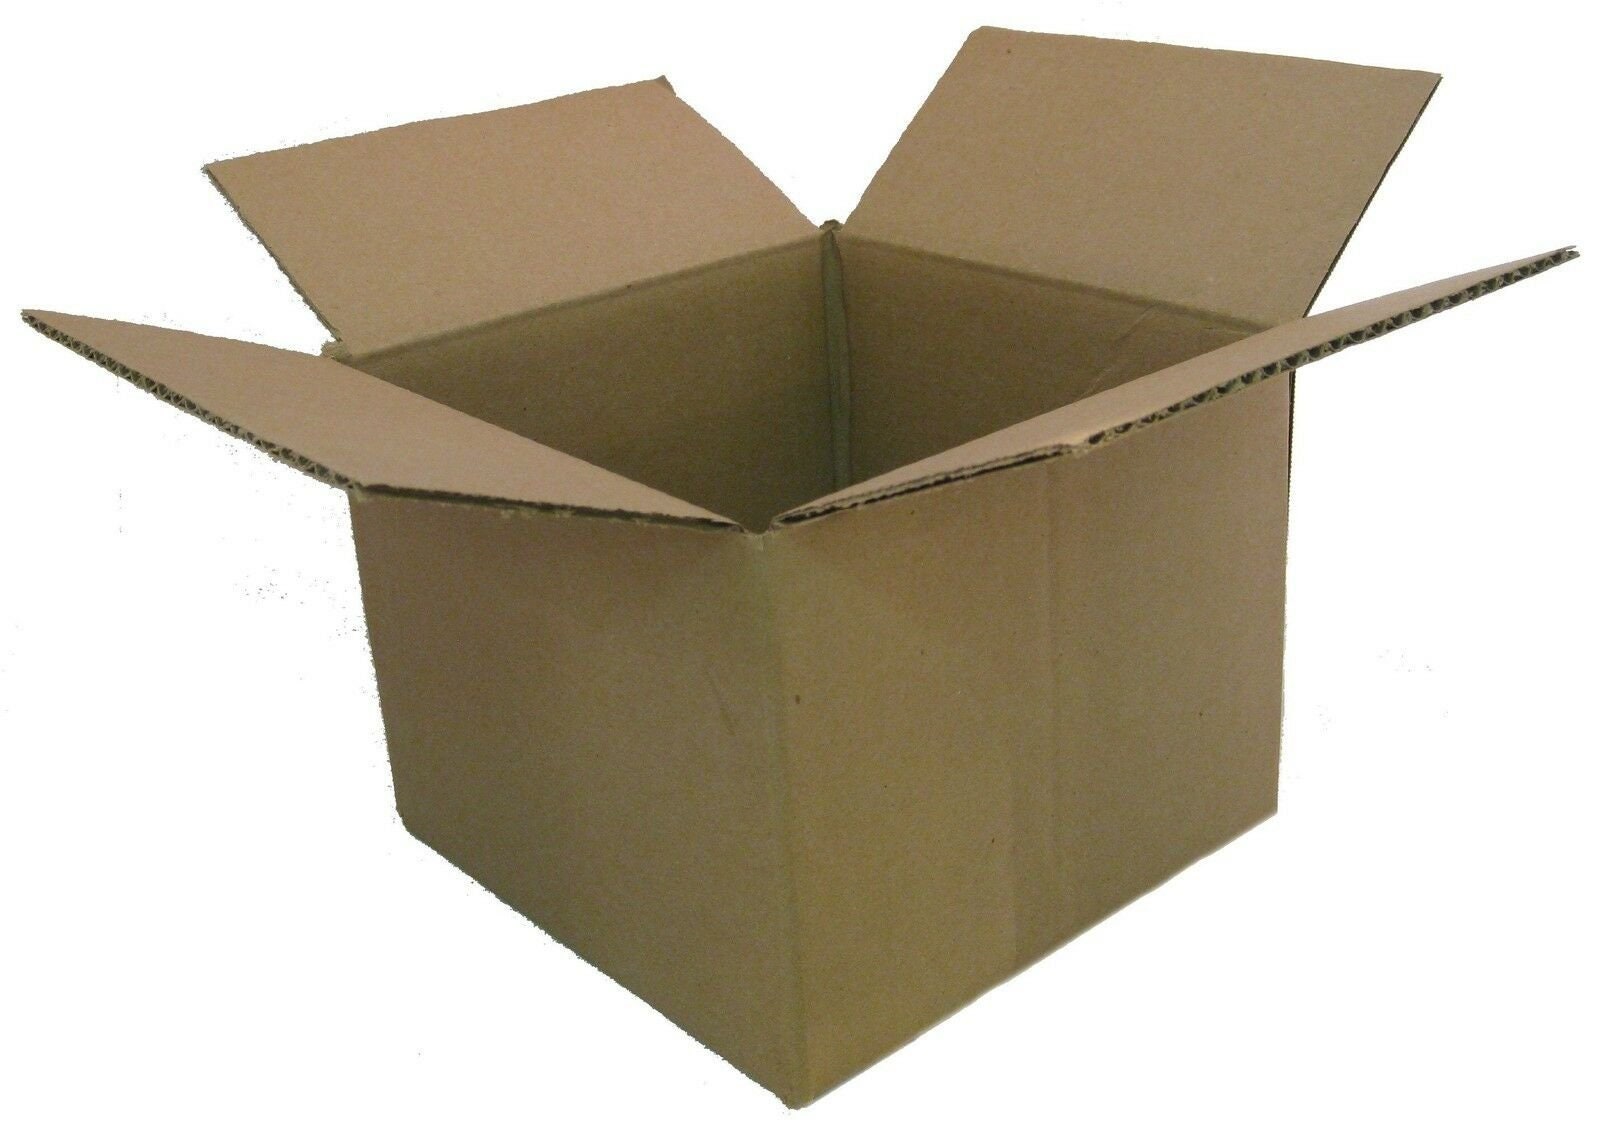 Supplyhut 25 12x4x4 Cardboard Paper Boxes Mailing Packing Shipping Box Corrugated Carton, Brown